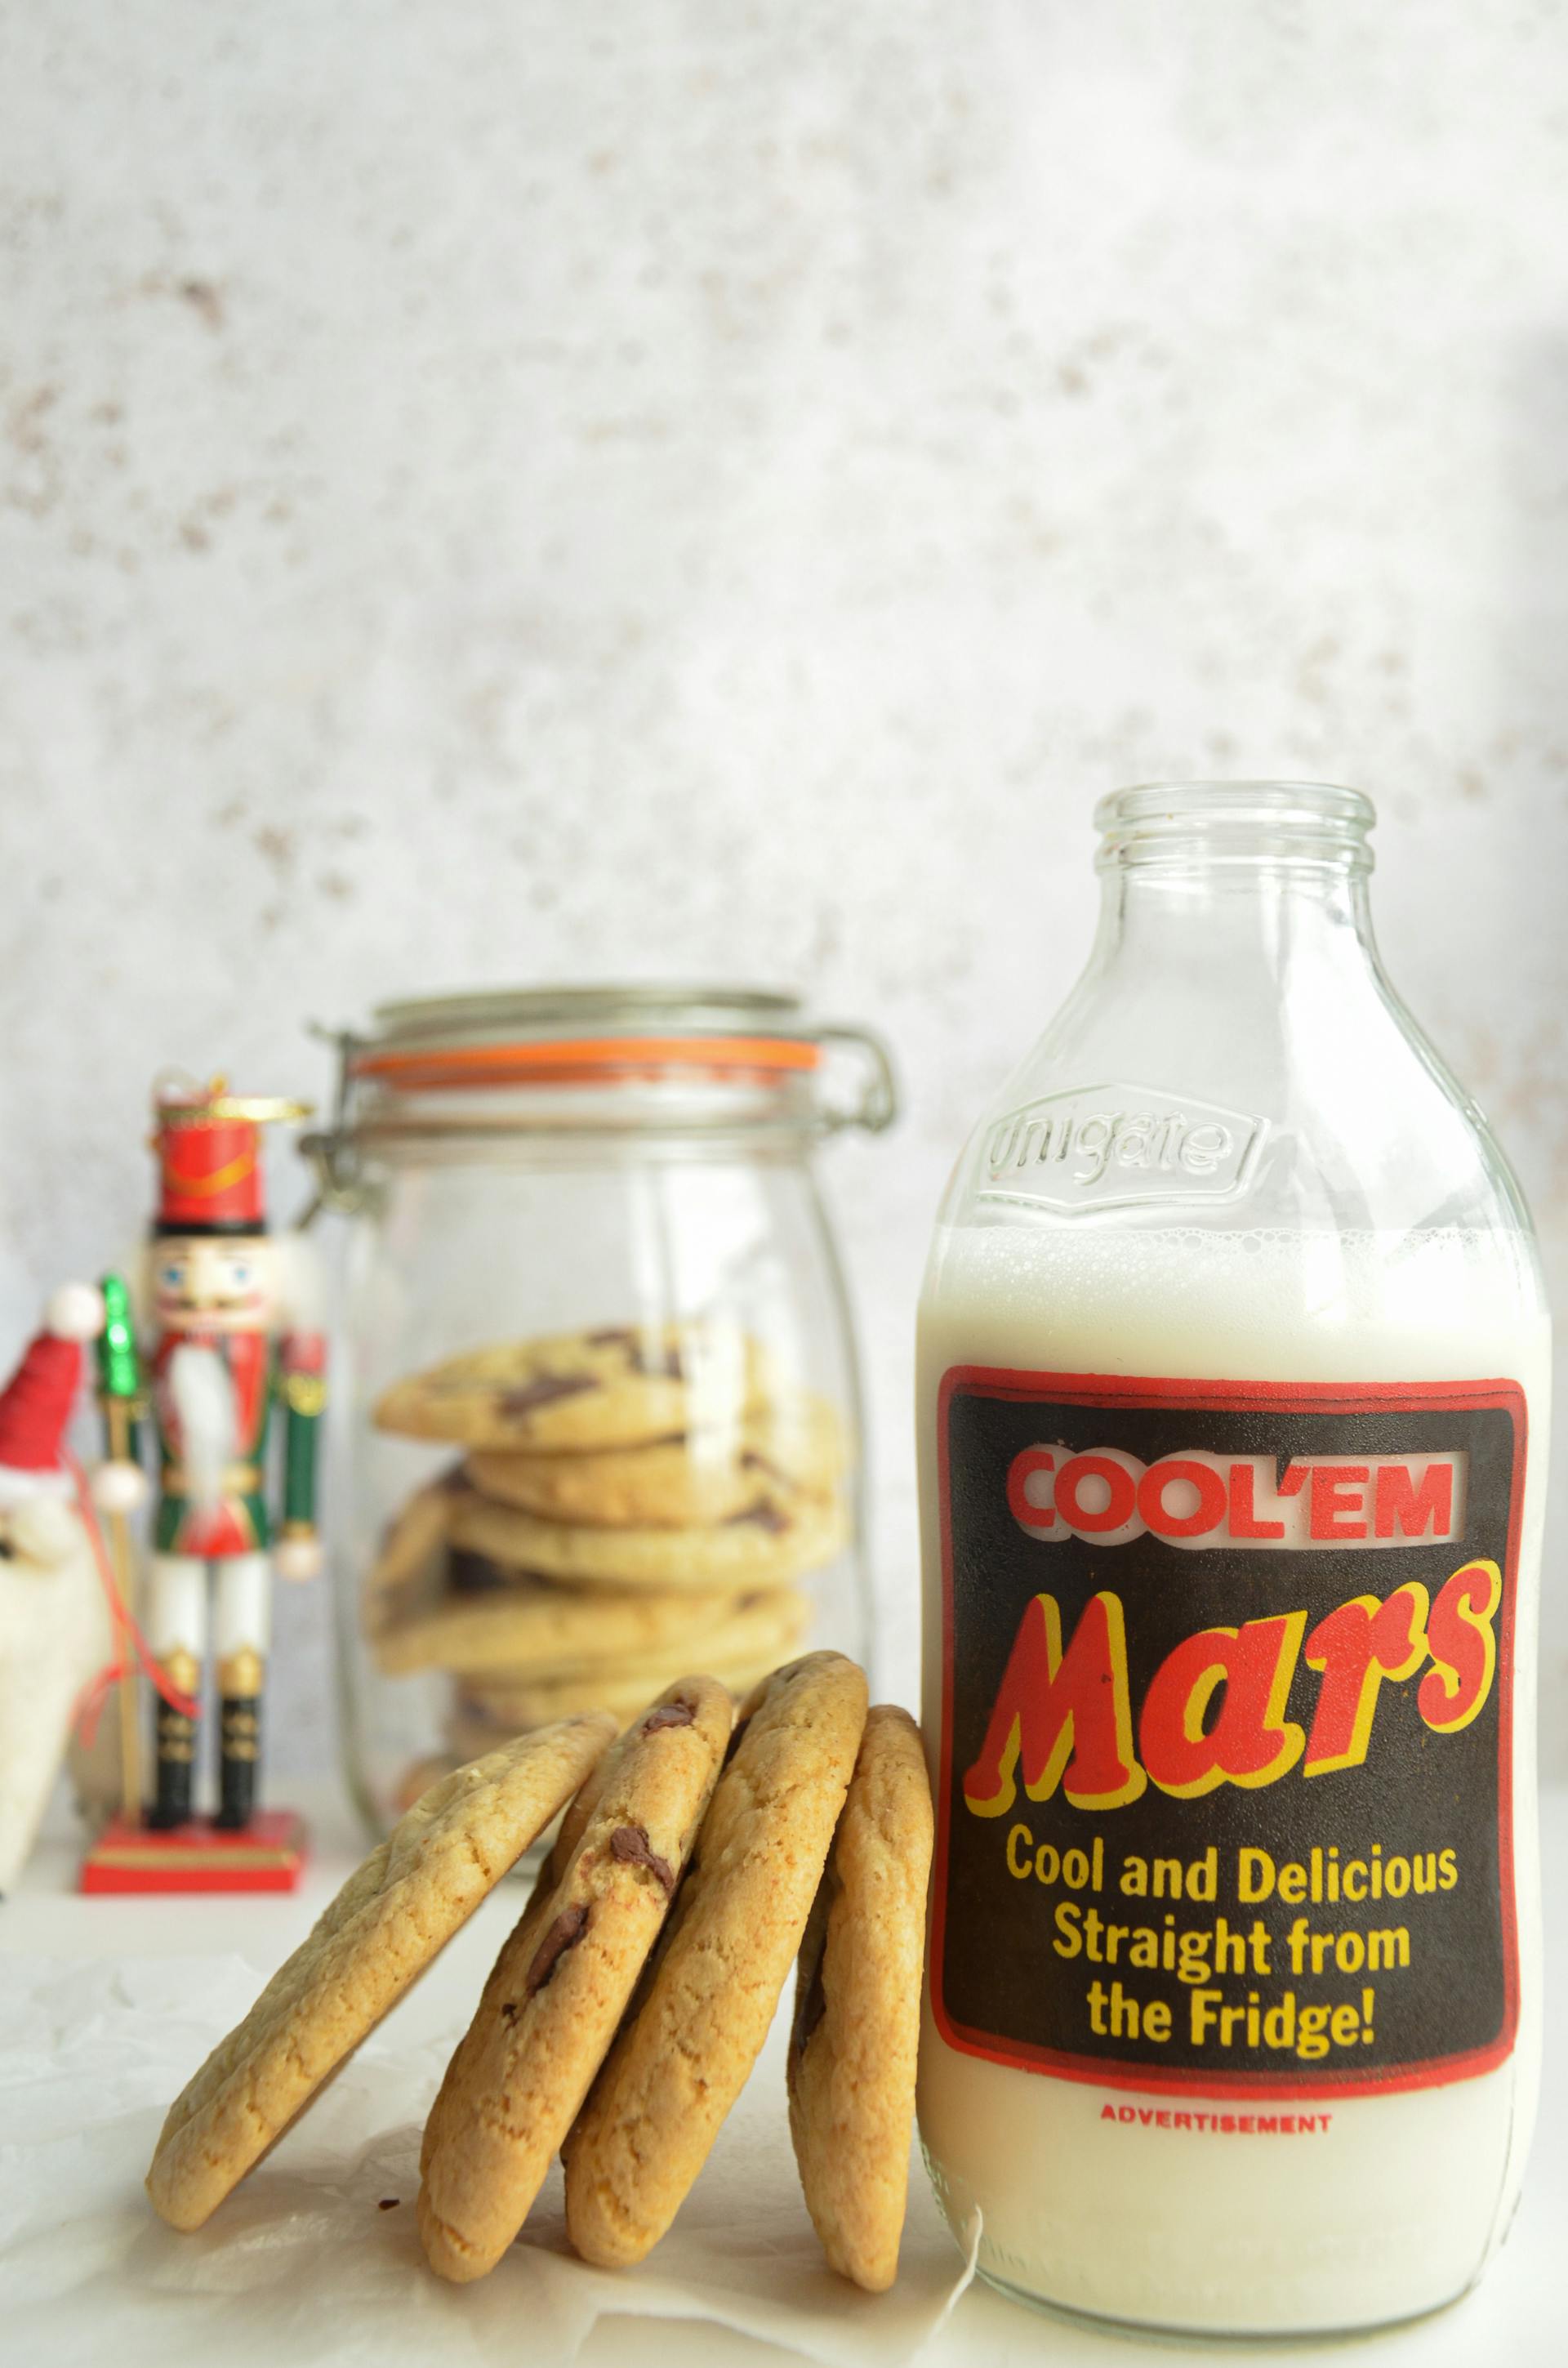 Cookies with a bottle of milk | Source: Pexels